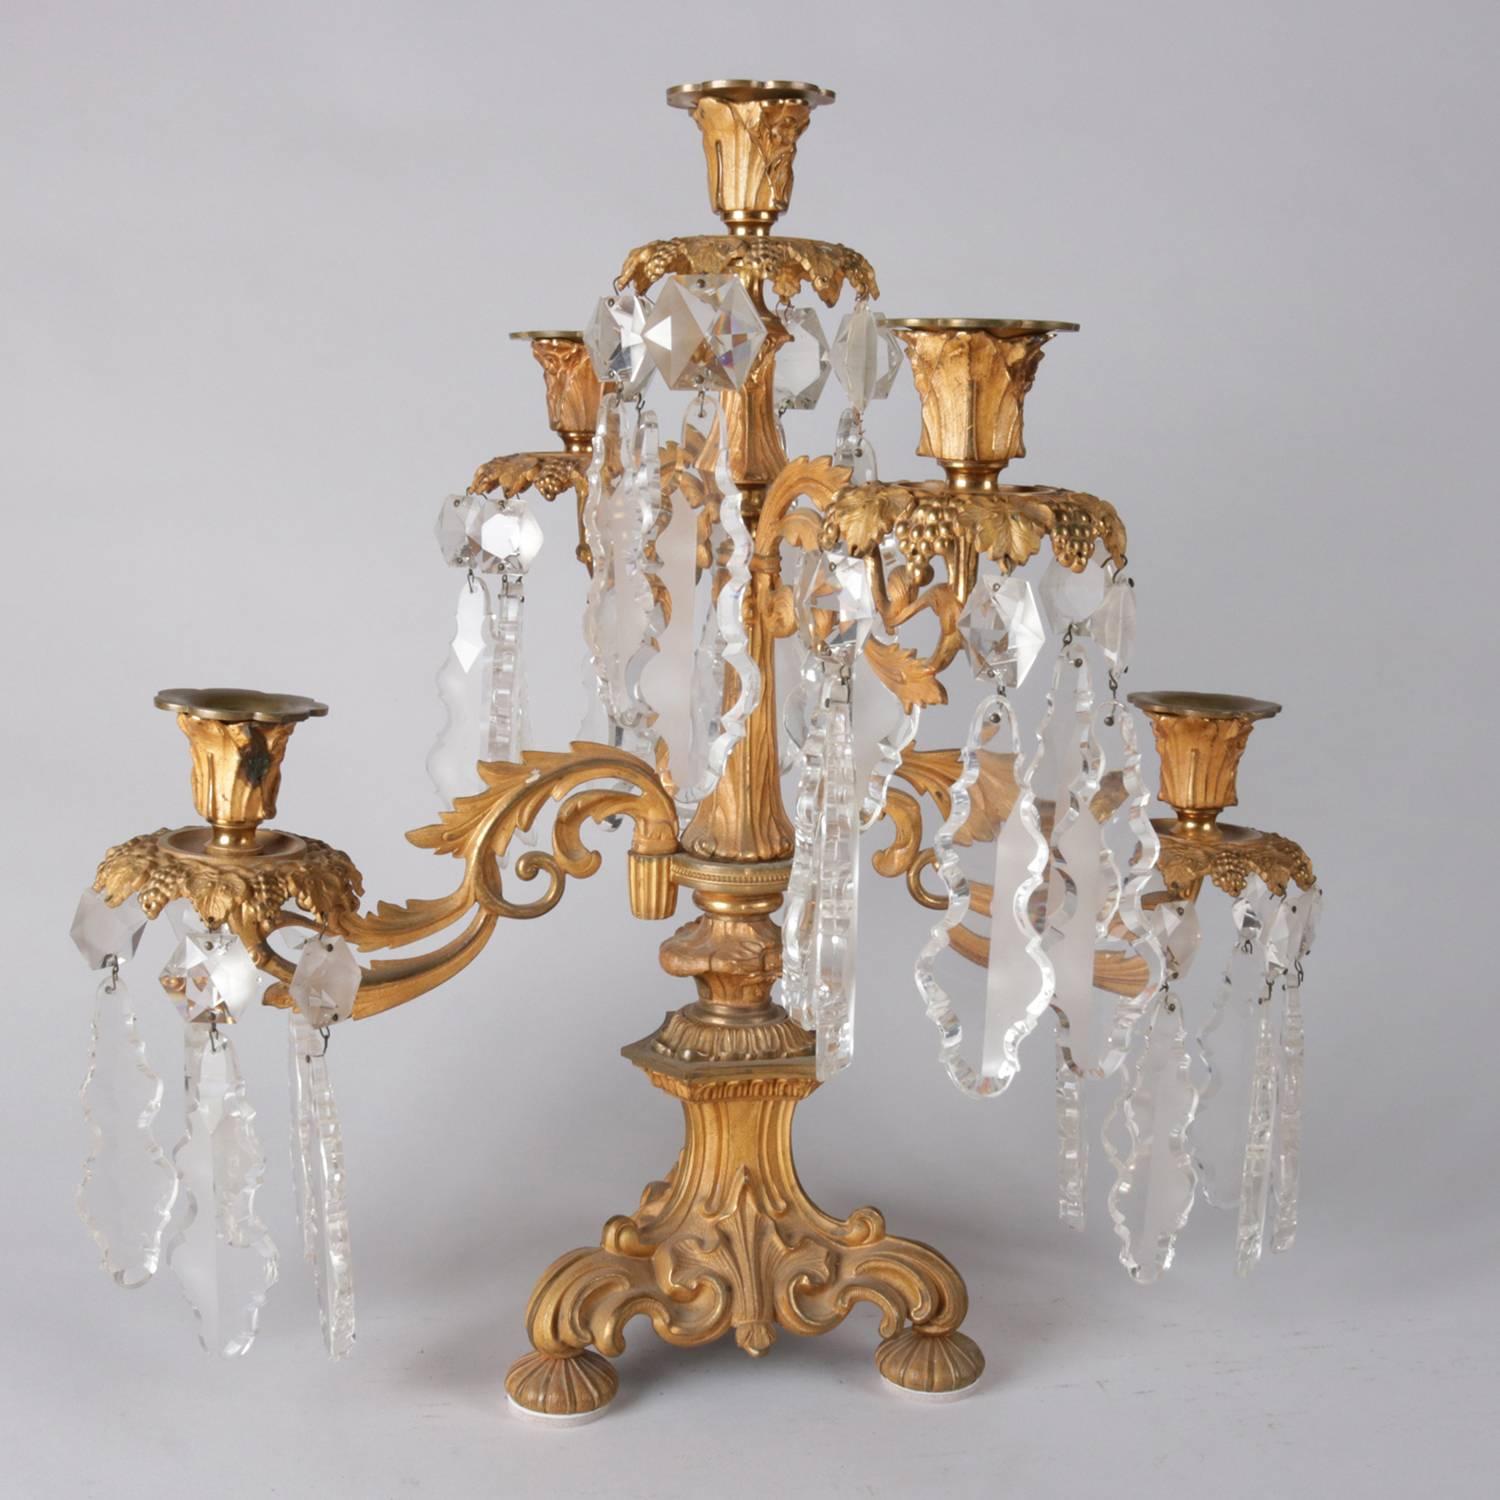 Antique Italian Baroque Cornelius School gilt cast bronze candelabra features four scroll and foliate form arms terminating in cut crystal prism decorate sconces with single central sconce, seated on tripod base with scroll form legs and reeded ball